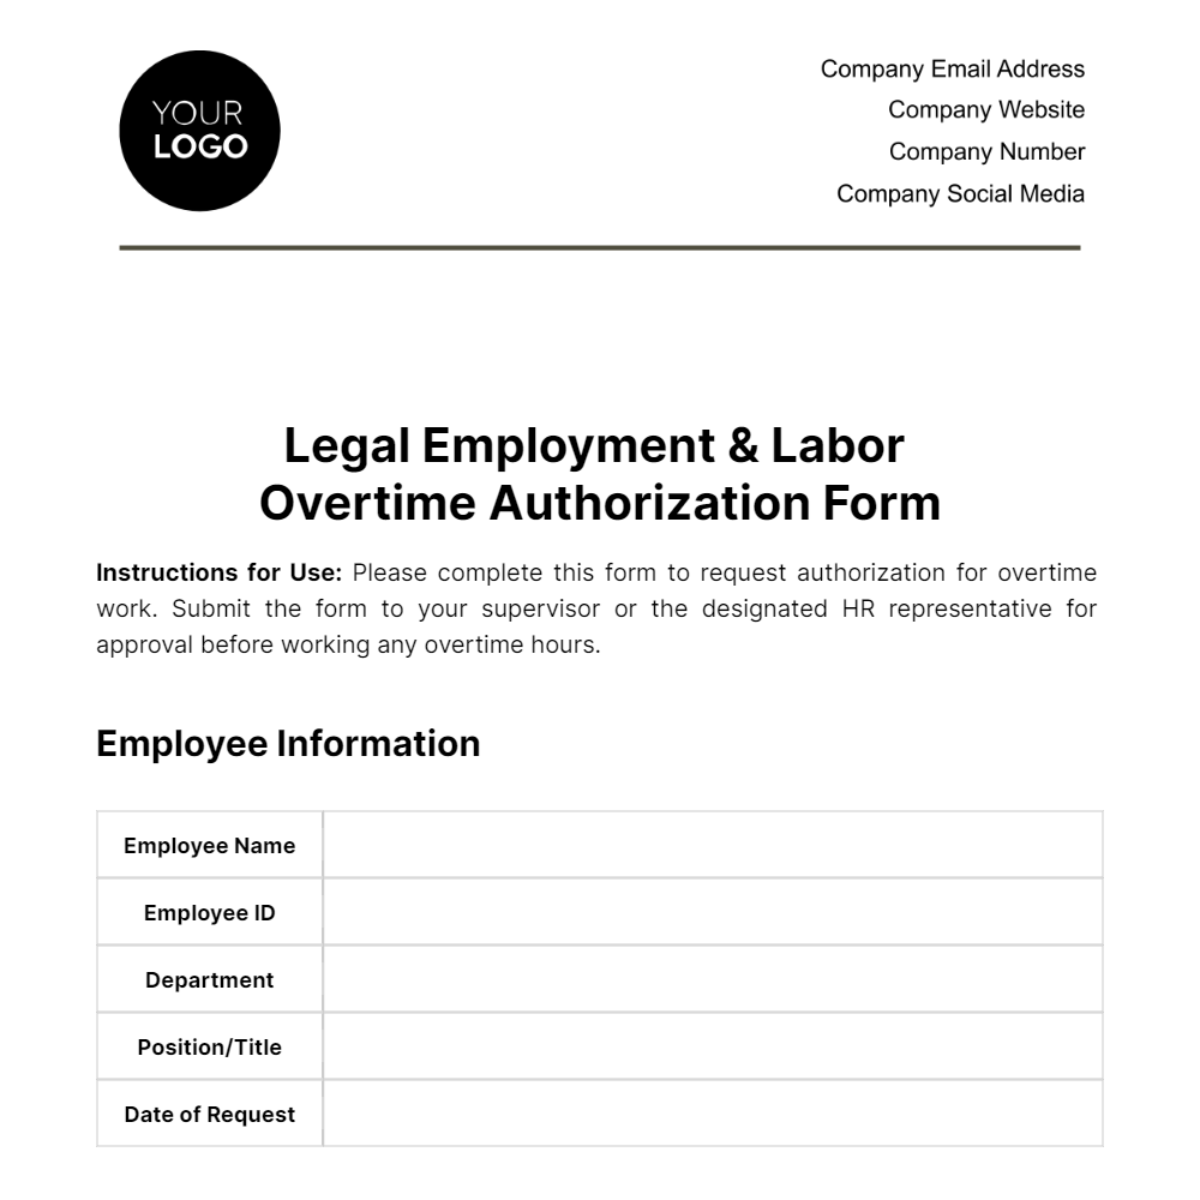 Legal Employment & Labor Overtime Authorization Form Template